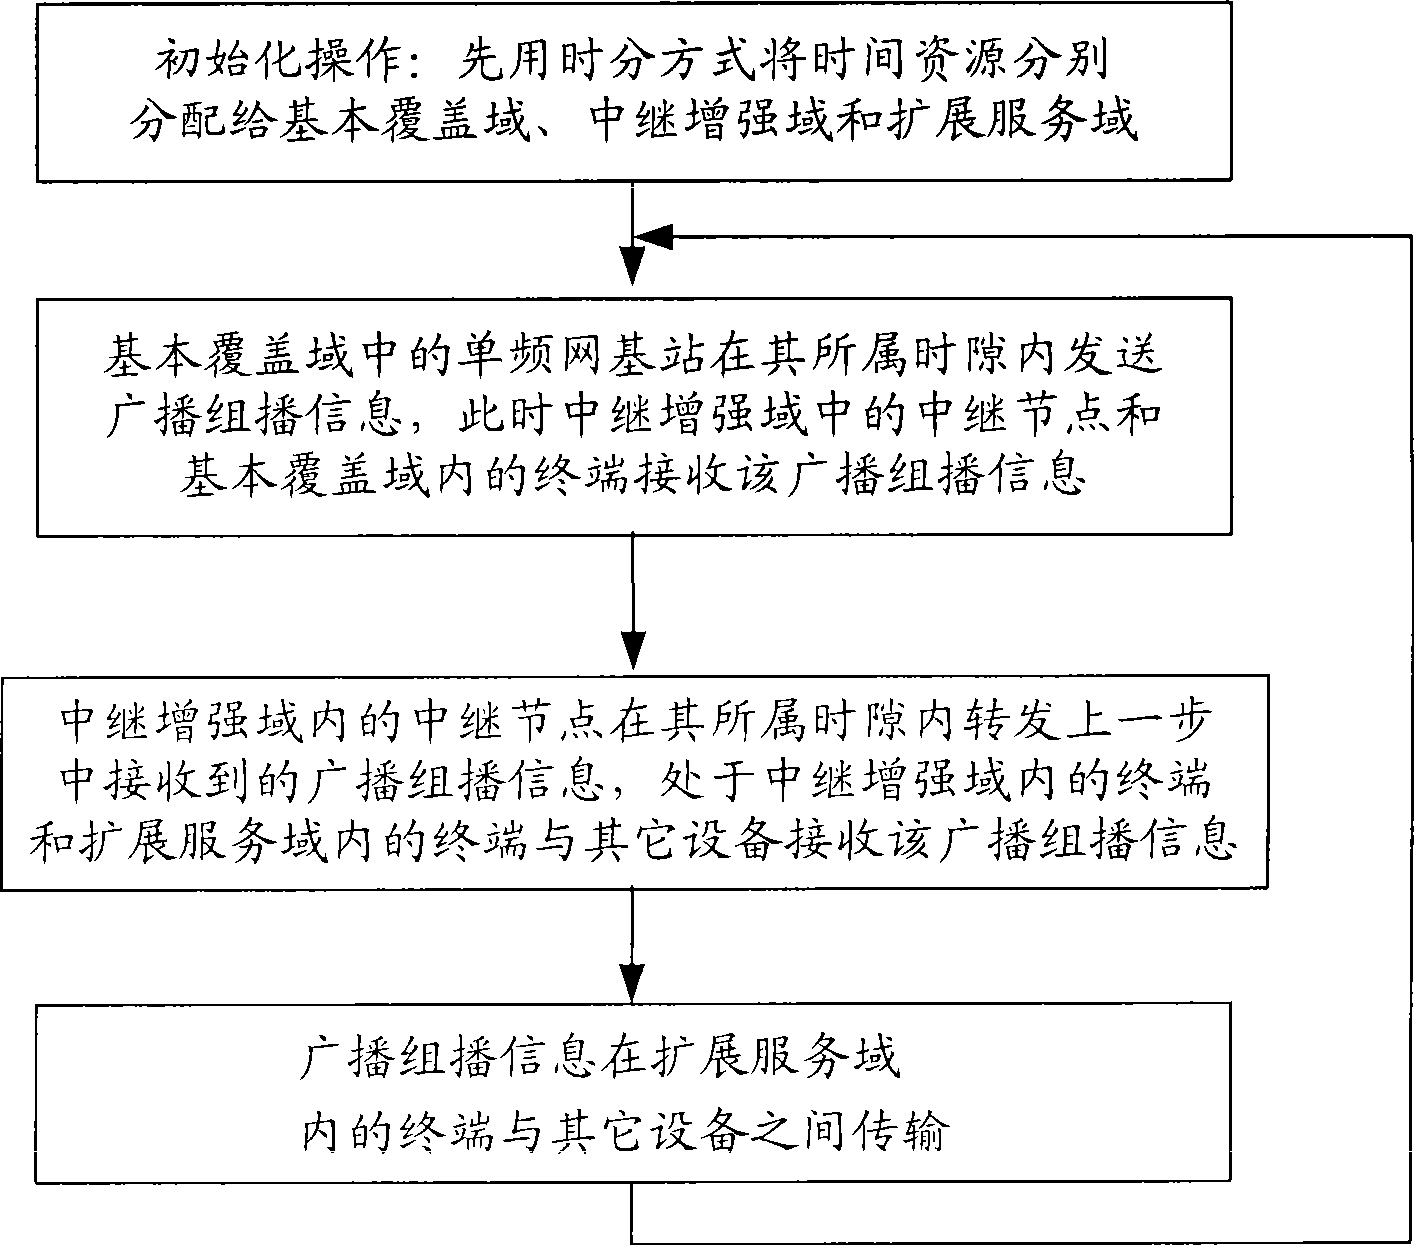 Multi-domain wireless broadcast multicast network system and method based on coordination technique